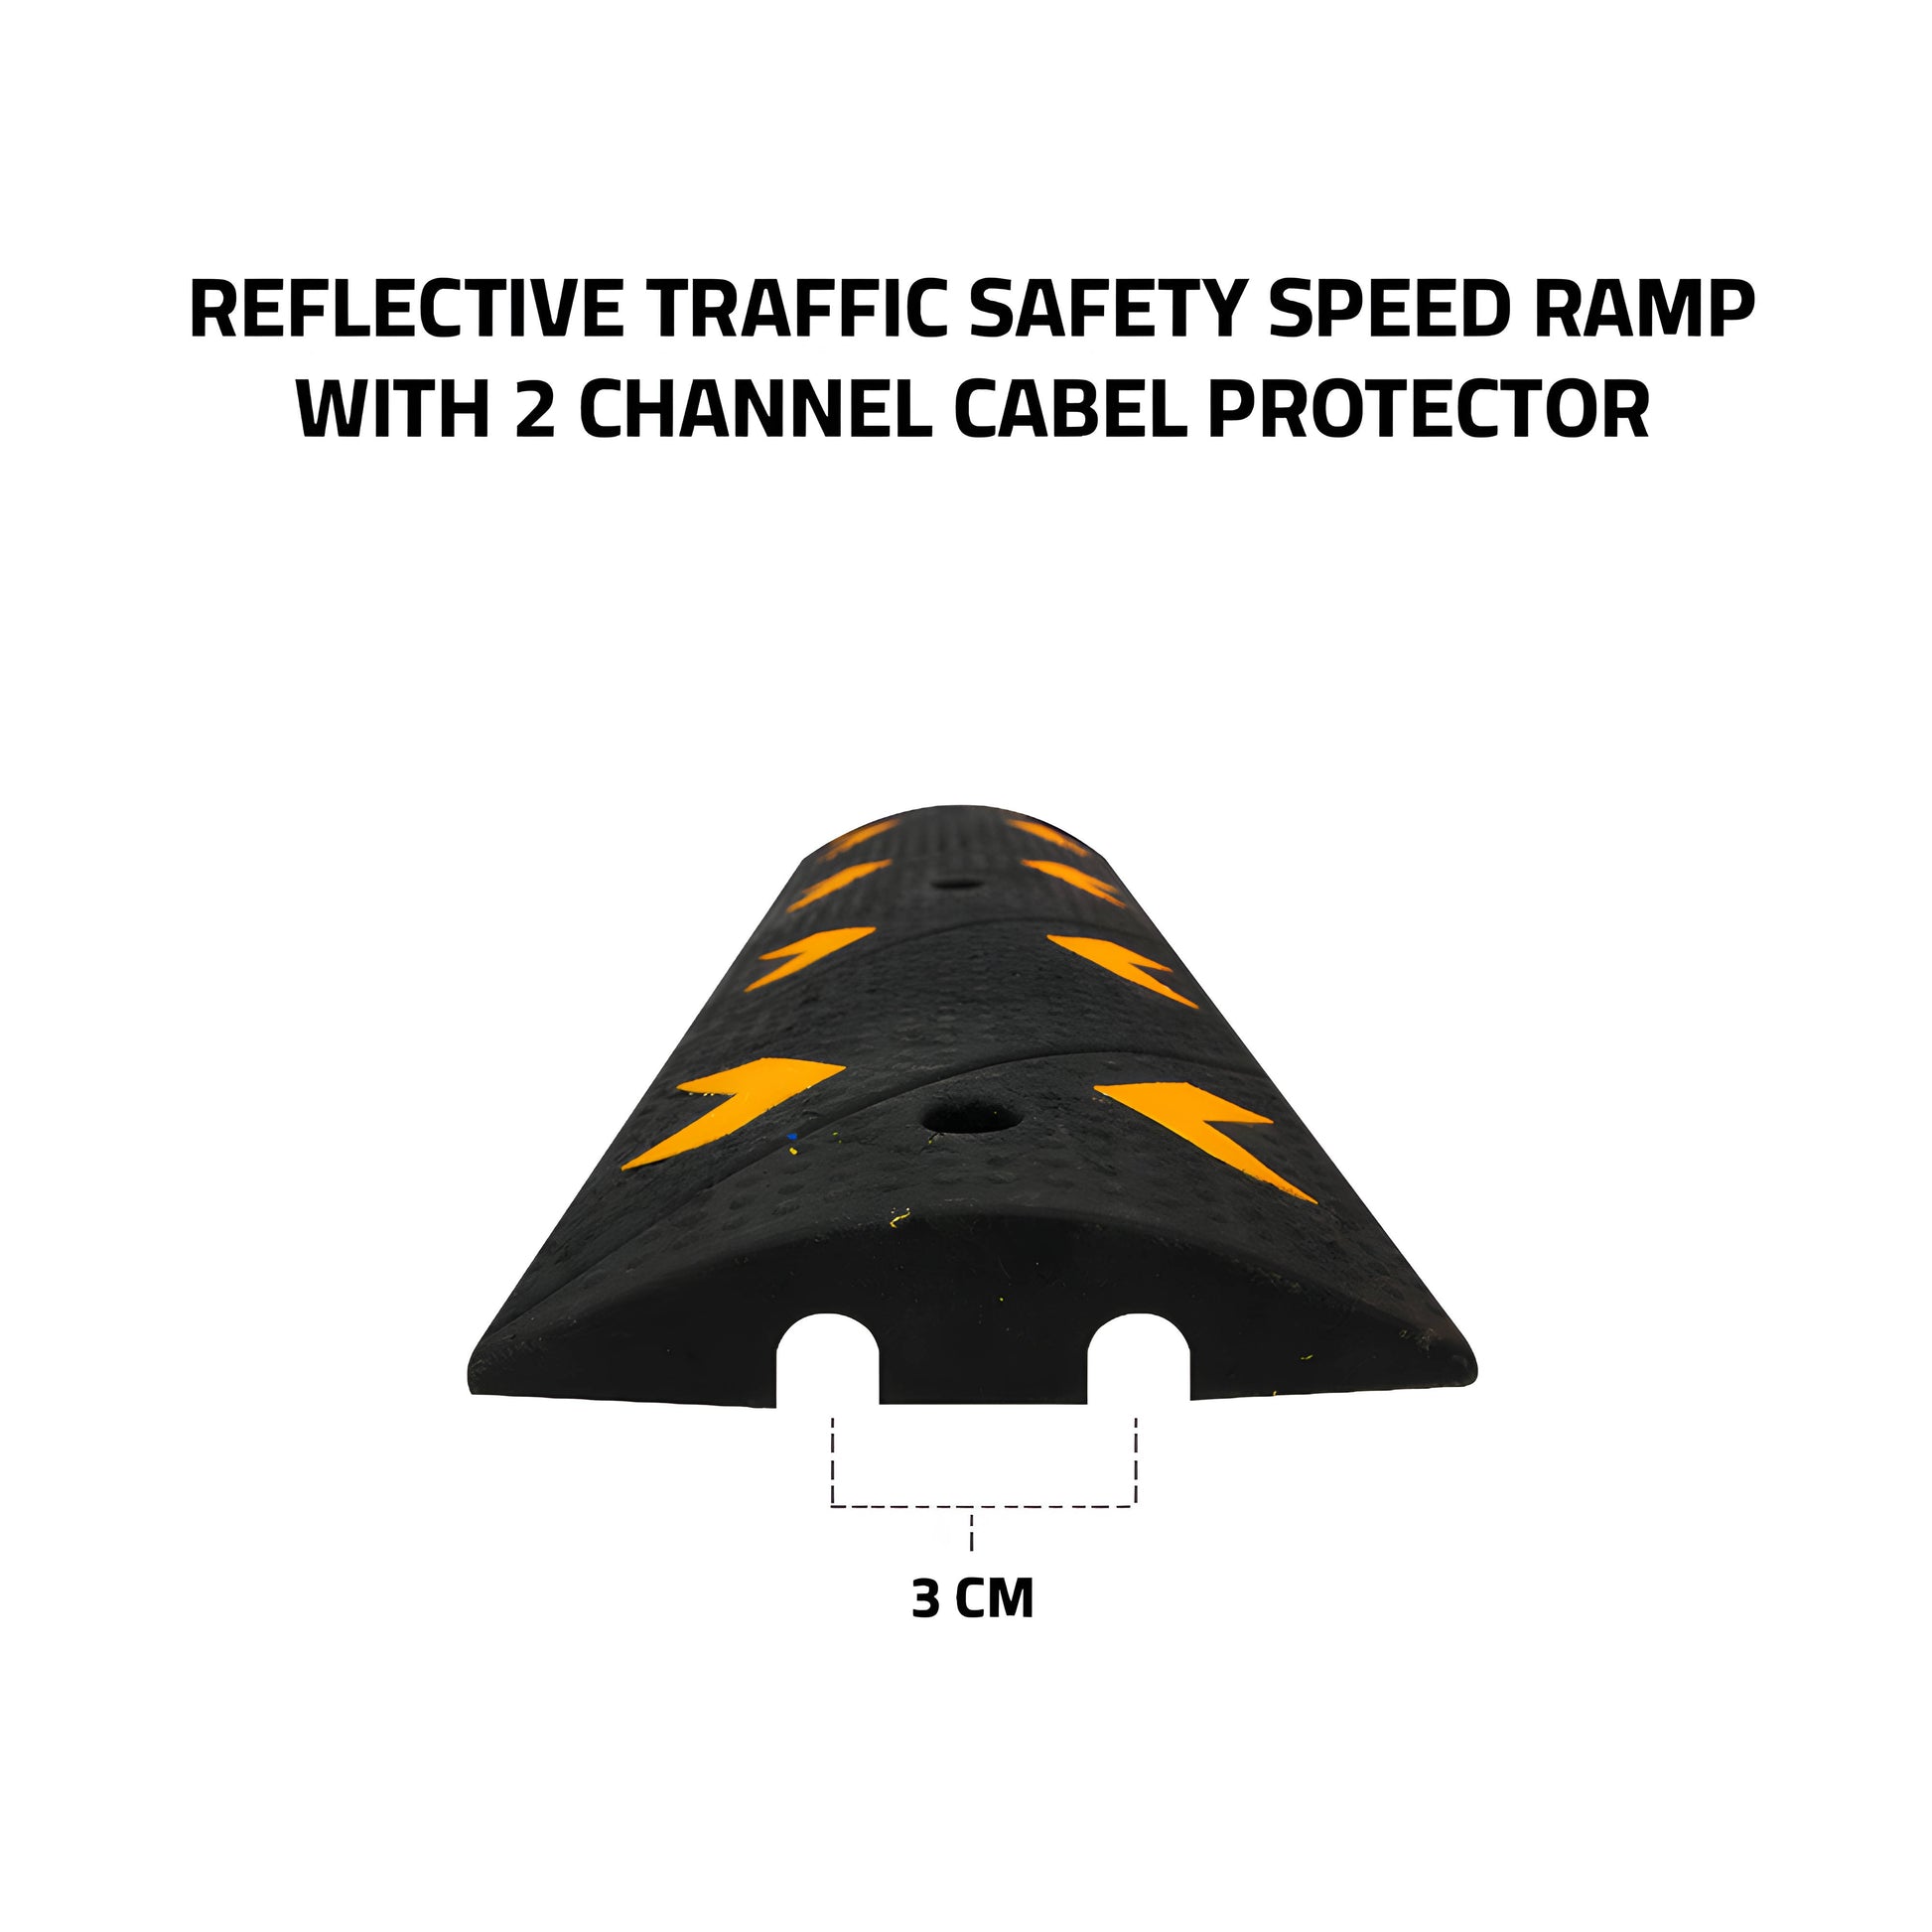 Reflective  Speed Ramp with Cable Protector 2 Channel - 1 Meter - Biri Group 